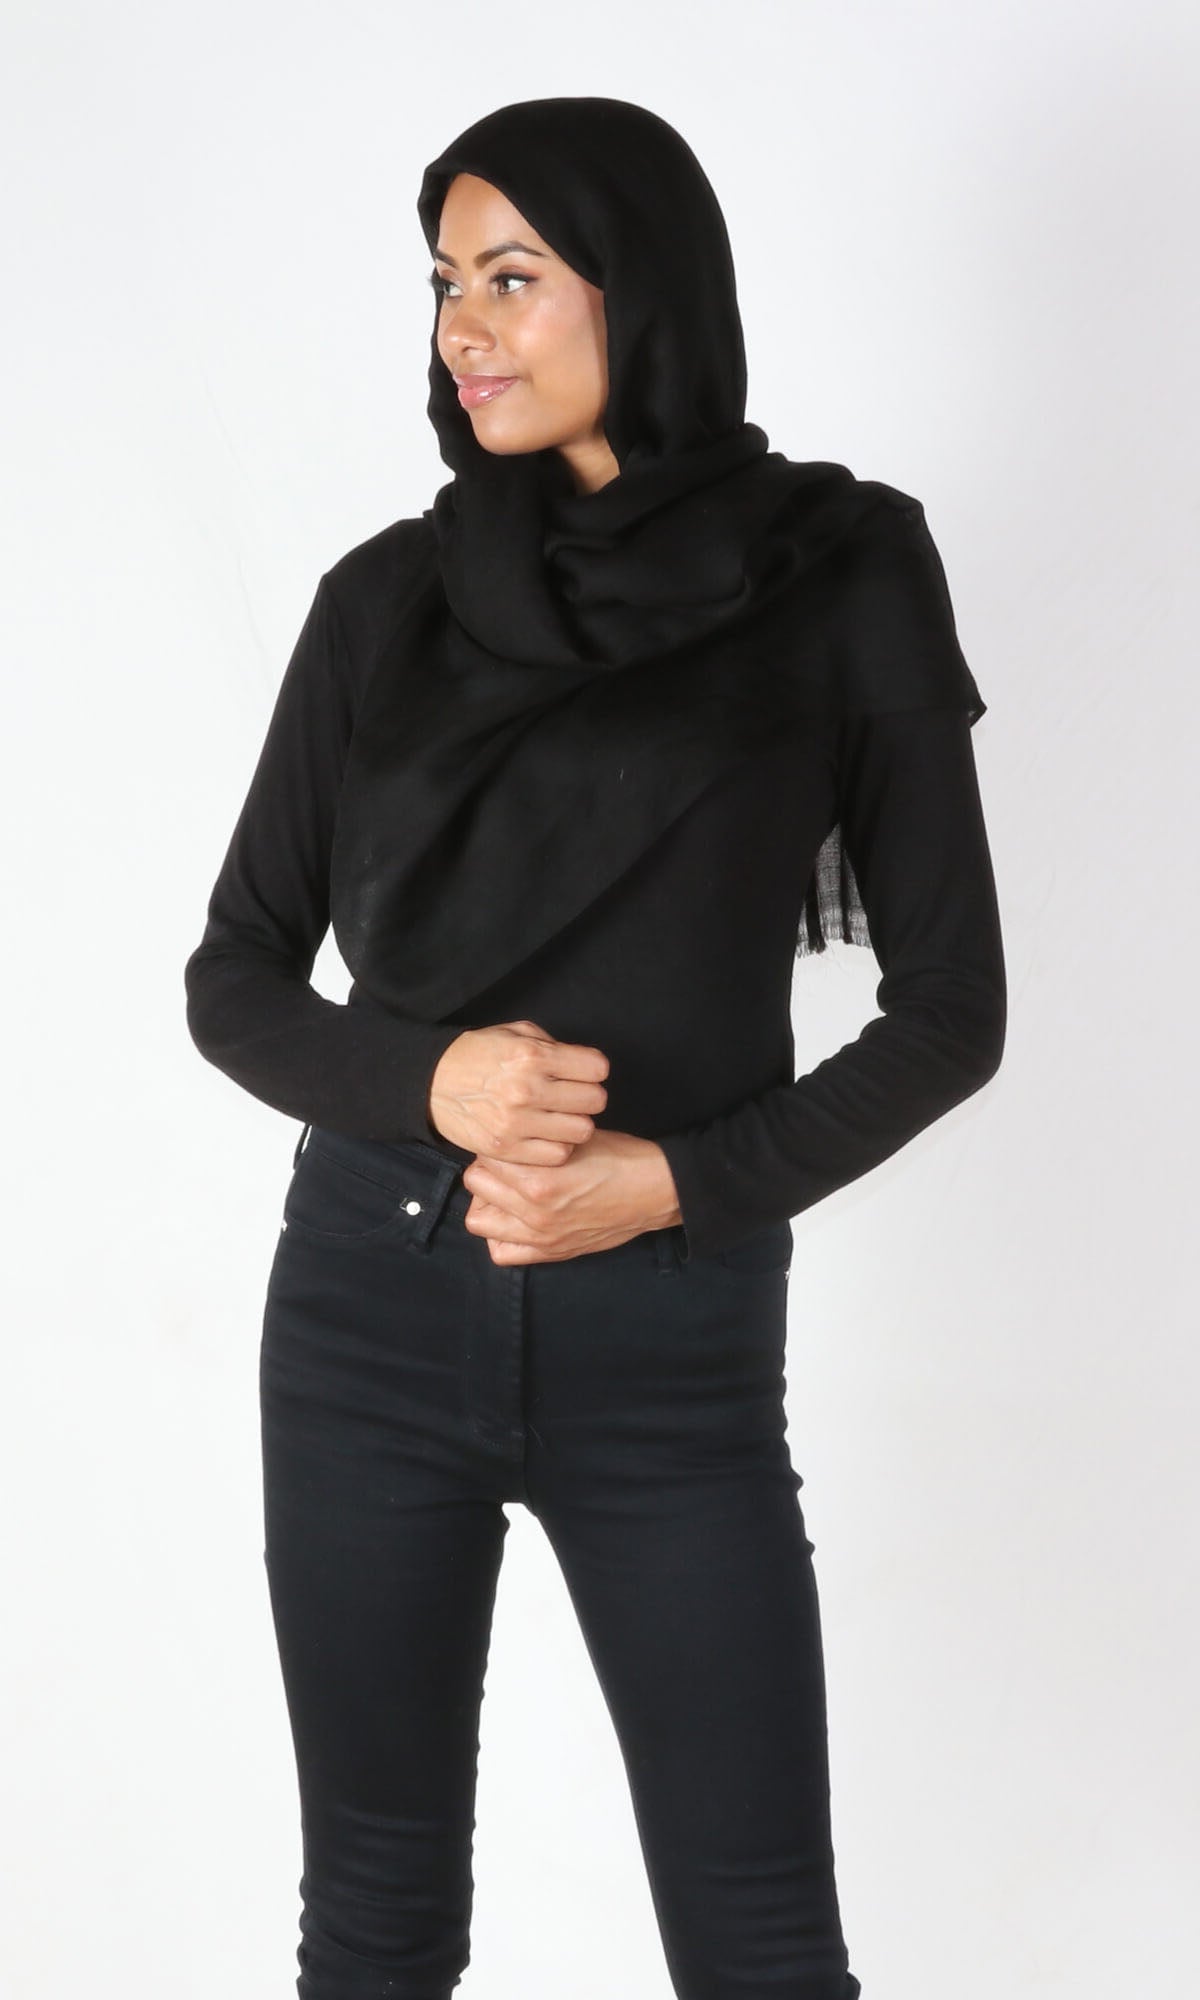 A beautiful 5ft 8 inches tall female model in a profile pose displays a 100% pure handmade black cashmere shawl wrapped around her head and draped nicely around her neck to convey the message of how the cashmere shawl can be used in a different environments when circumstances call for it.